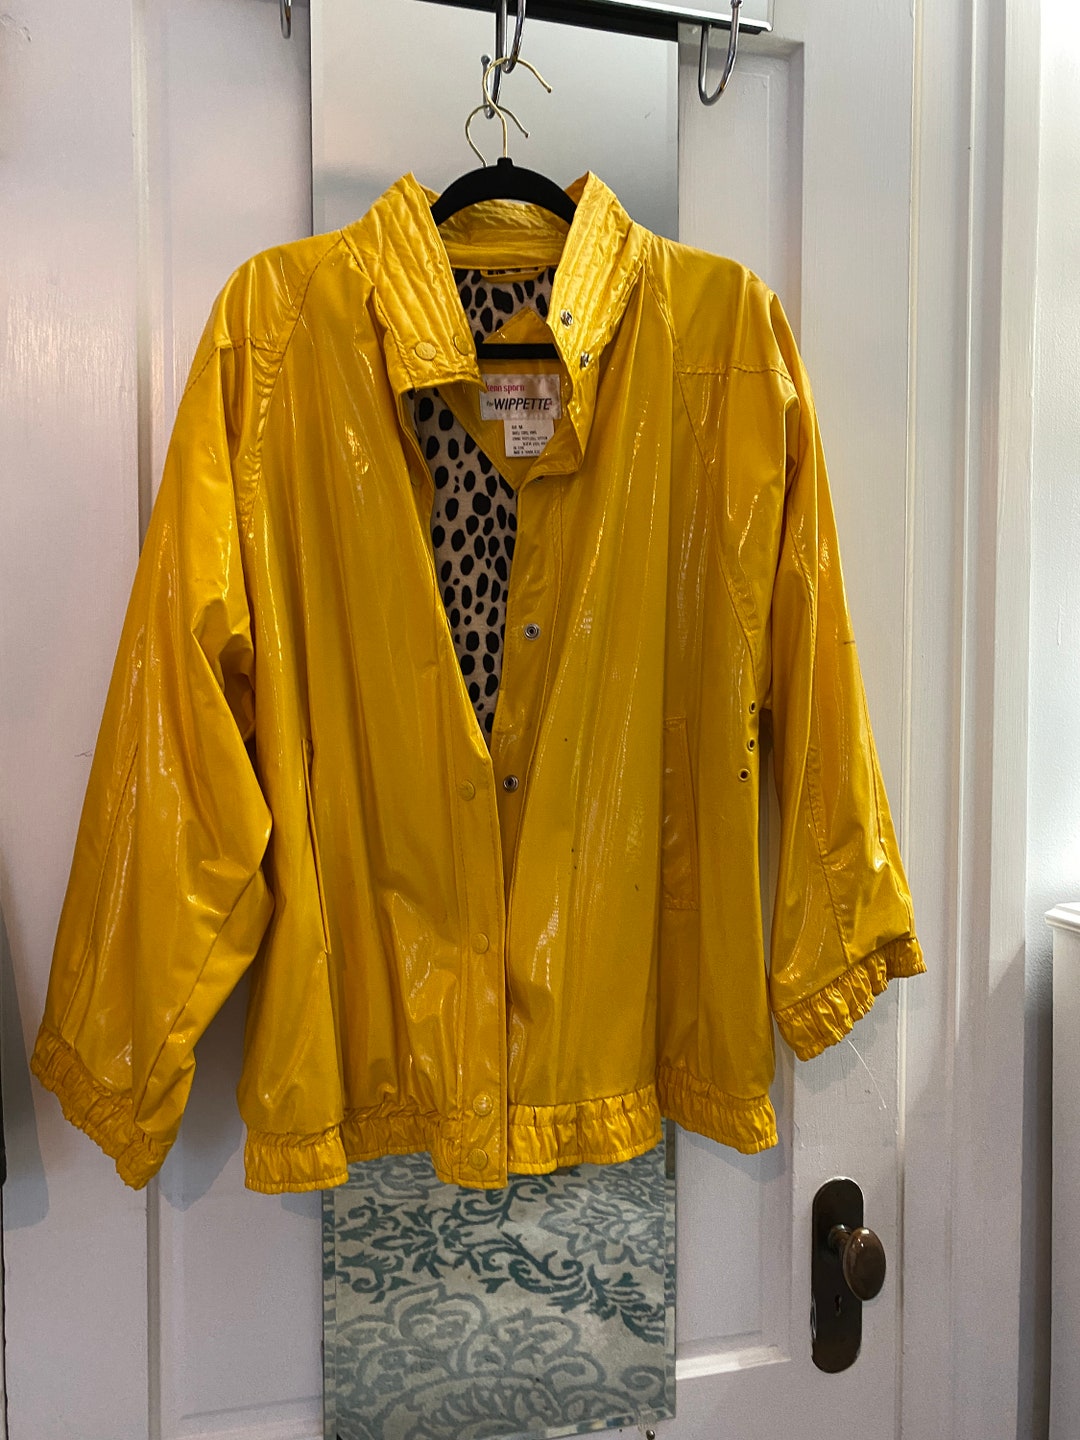 Ken Sporn for Wippette Vintage Yellow Raincoat With Leopard - Etsy